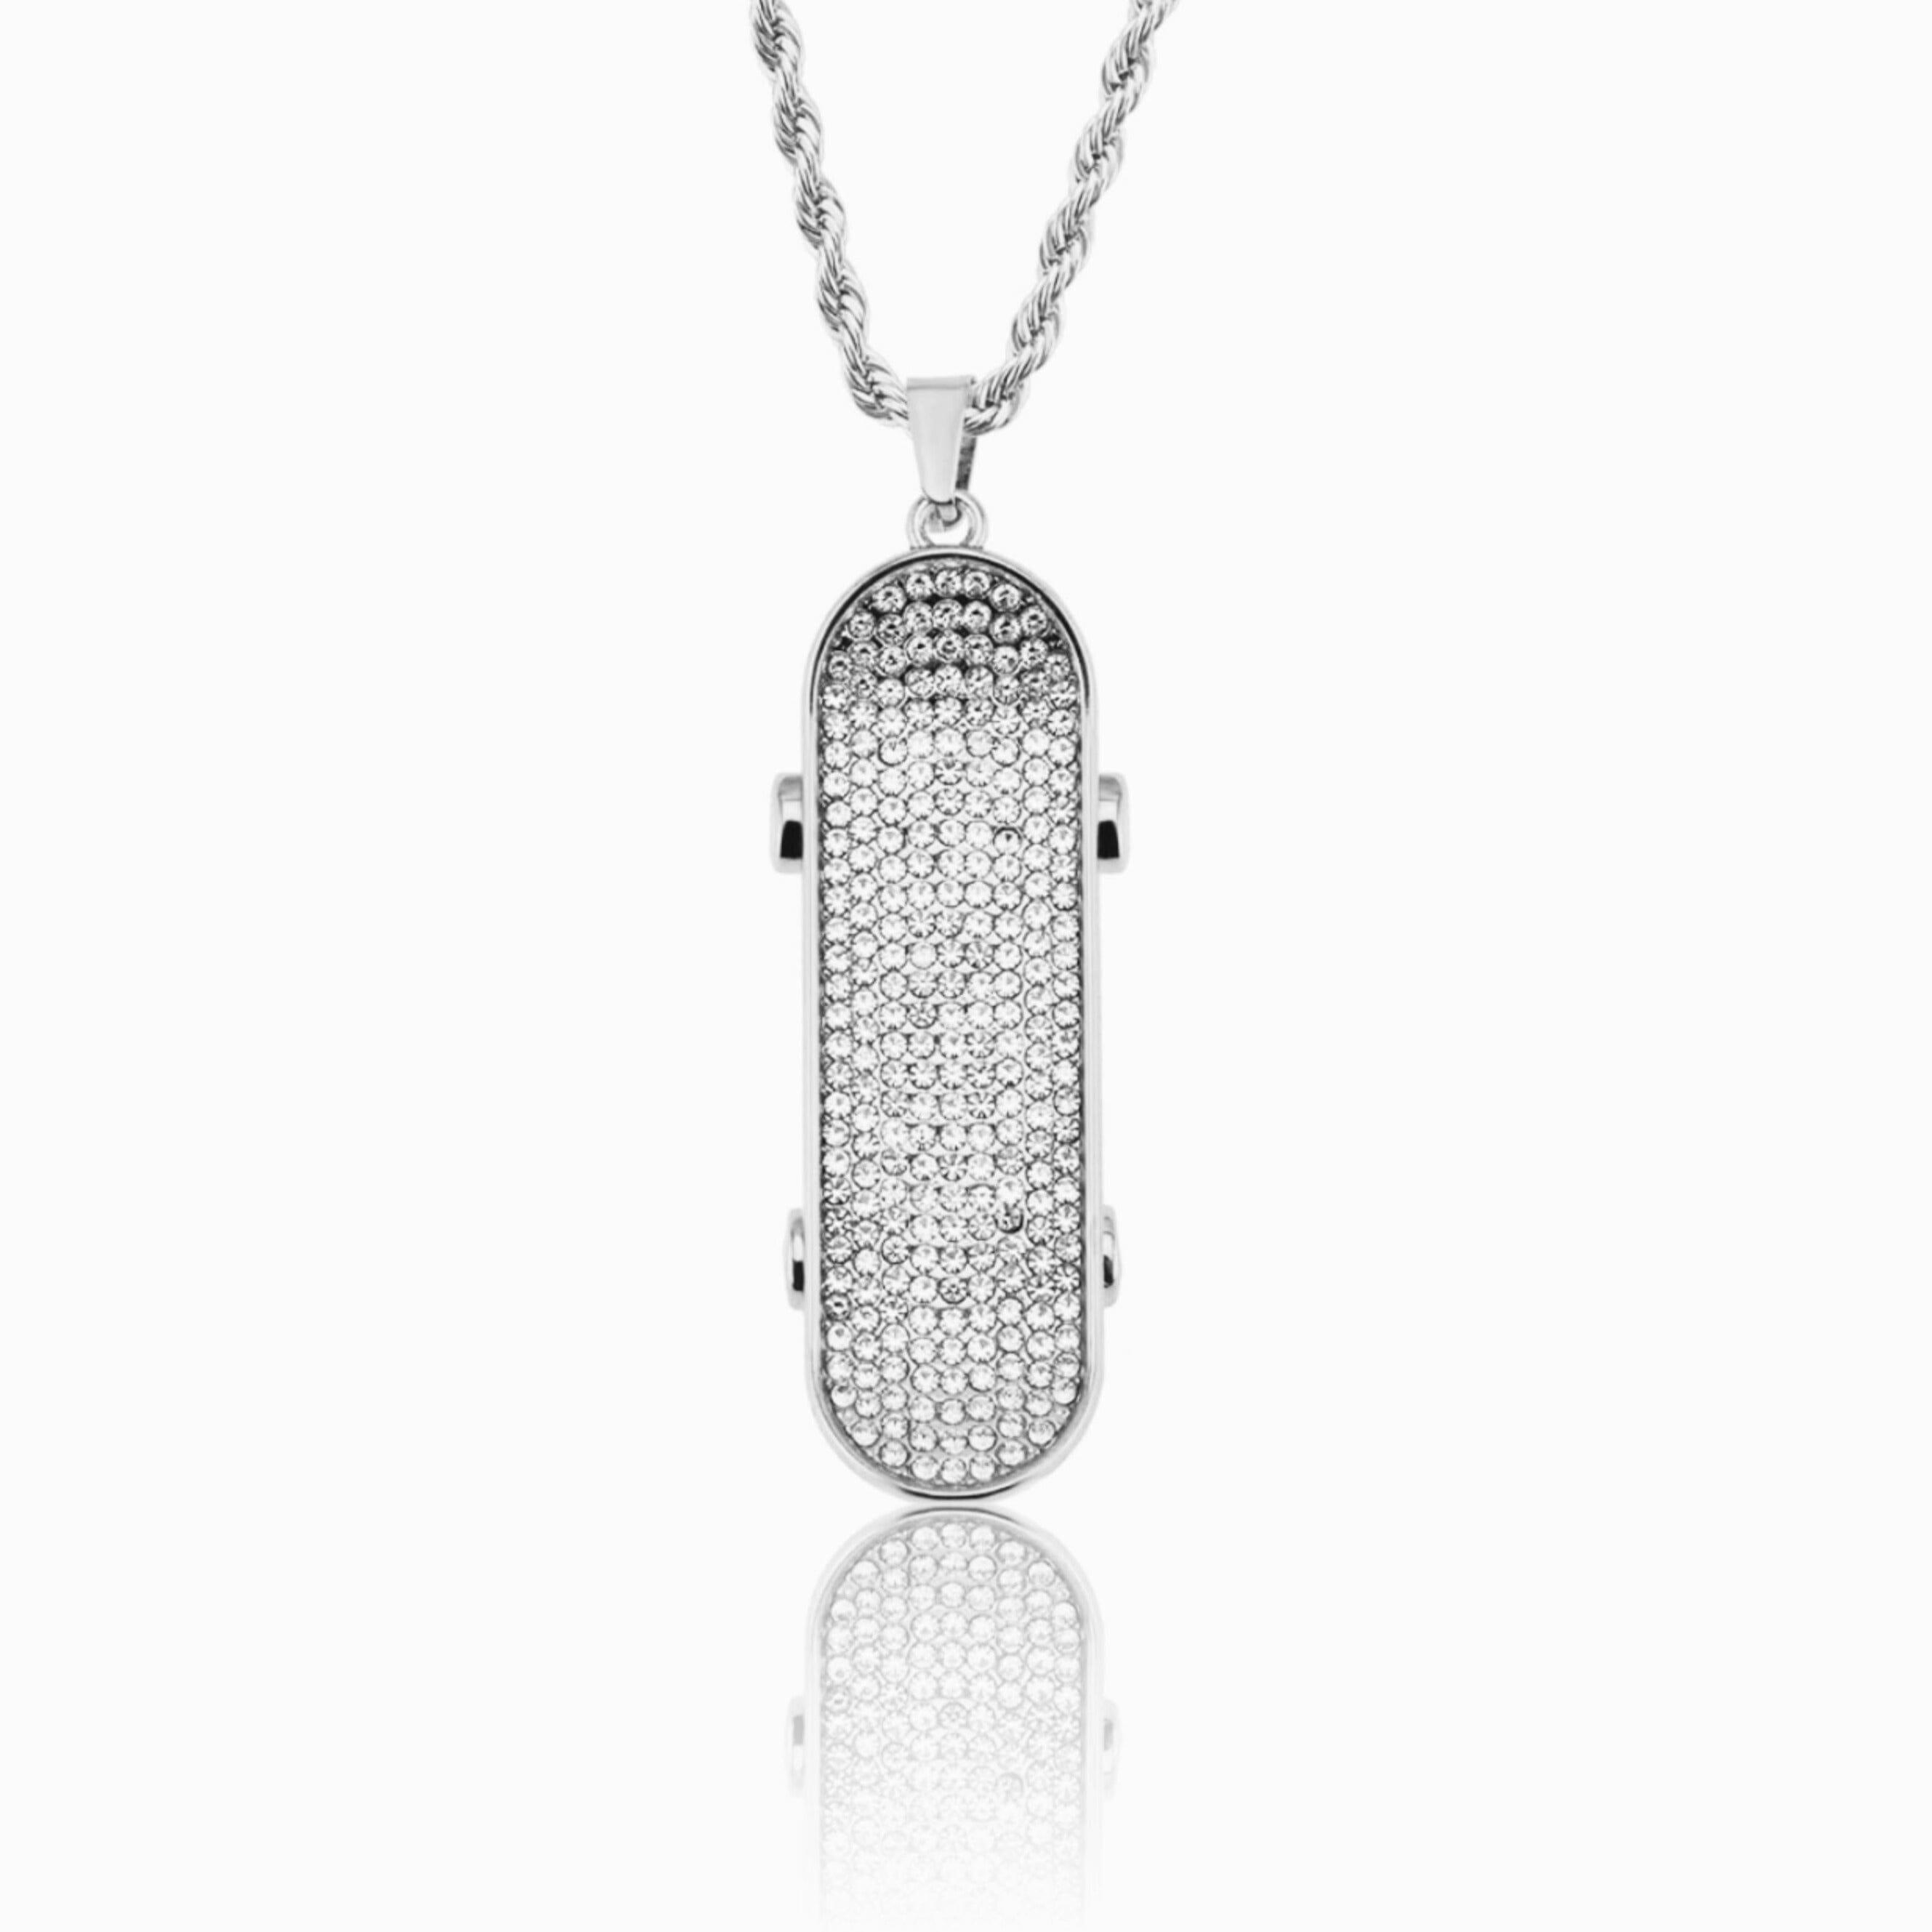 YOUNG. WILD. FREE. - Skateboard Pendant - 2inch Charms & Pendants Brass with CZ Stone Free Rope Chain White Gold